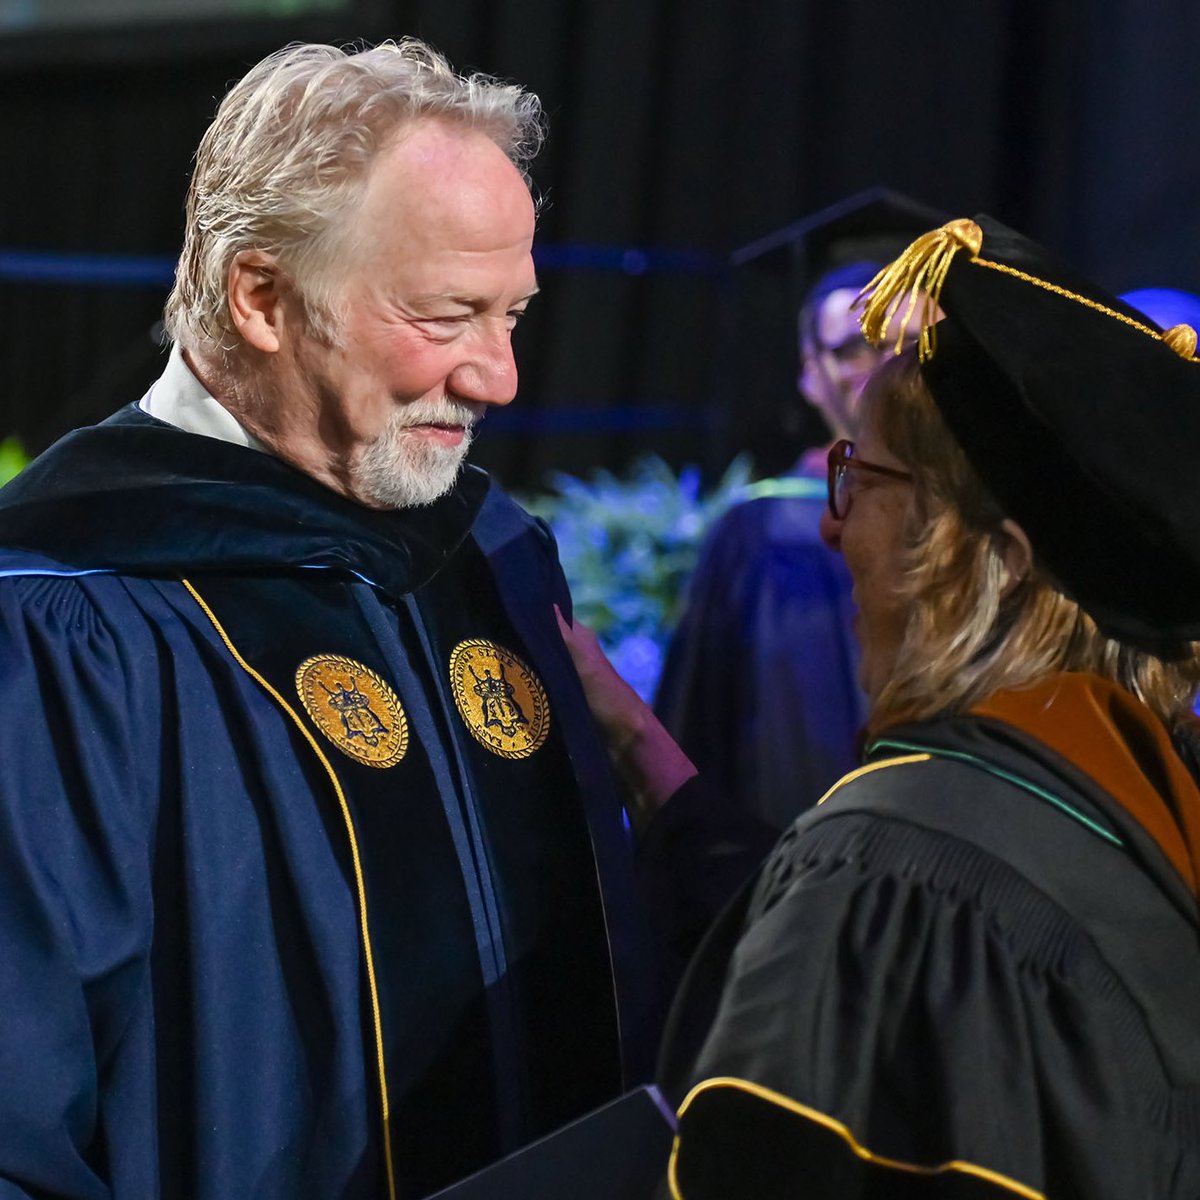 'You’ve been prepped and trained to go after life. That’s what you’ve been trained for. Go! This is no time to rest.' - Timothy Busfield A heartfelt thank you to our Spring Commencement Keynote Speaker for sharing his experiences and words of wisdom with our grads!